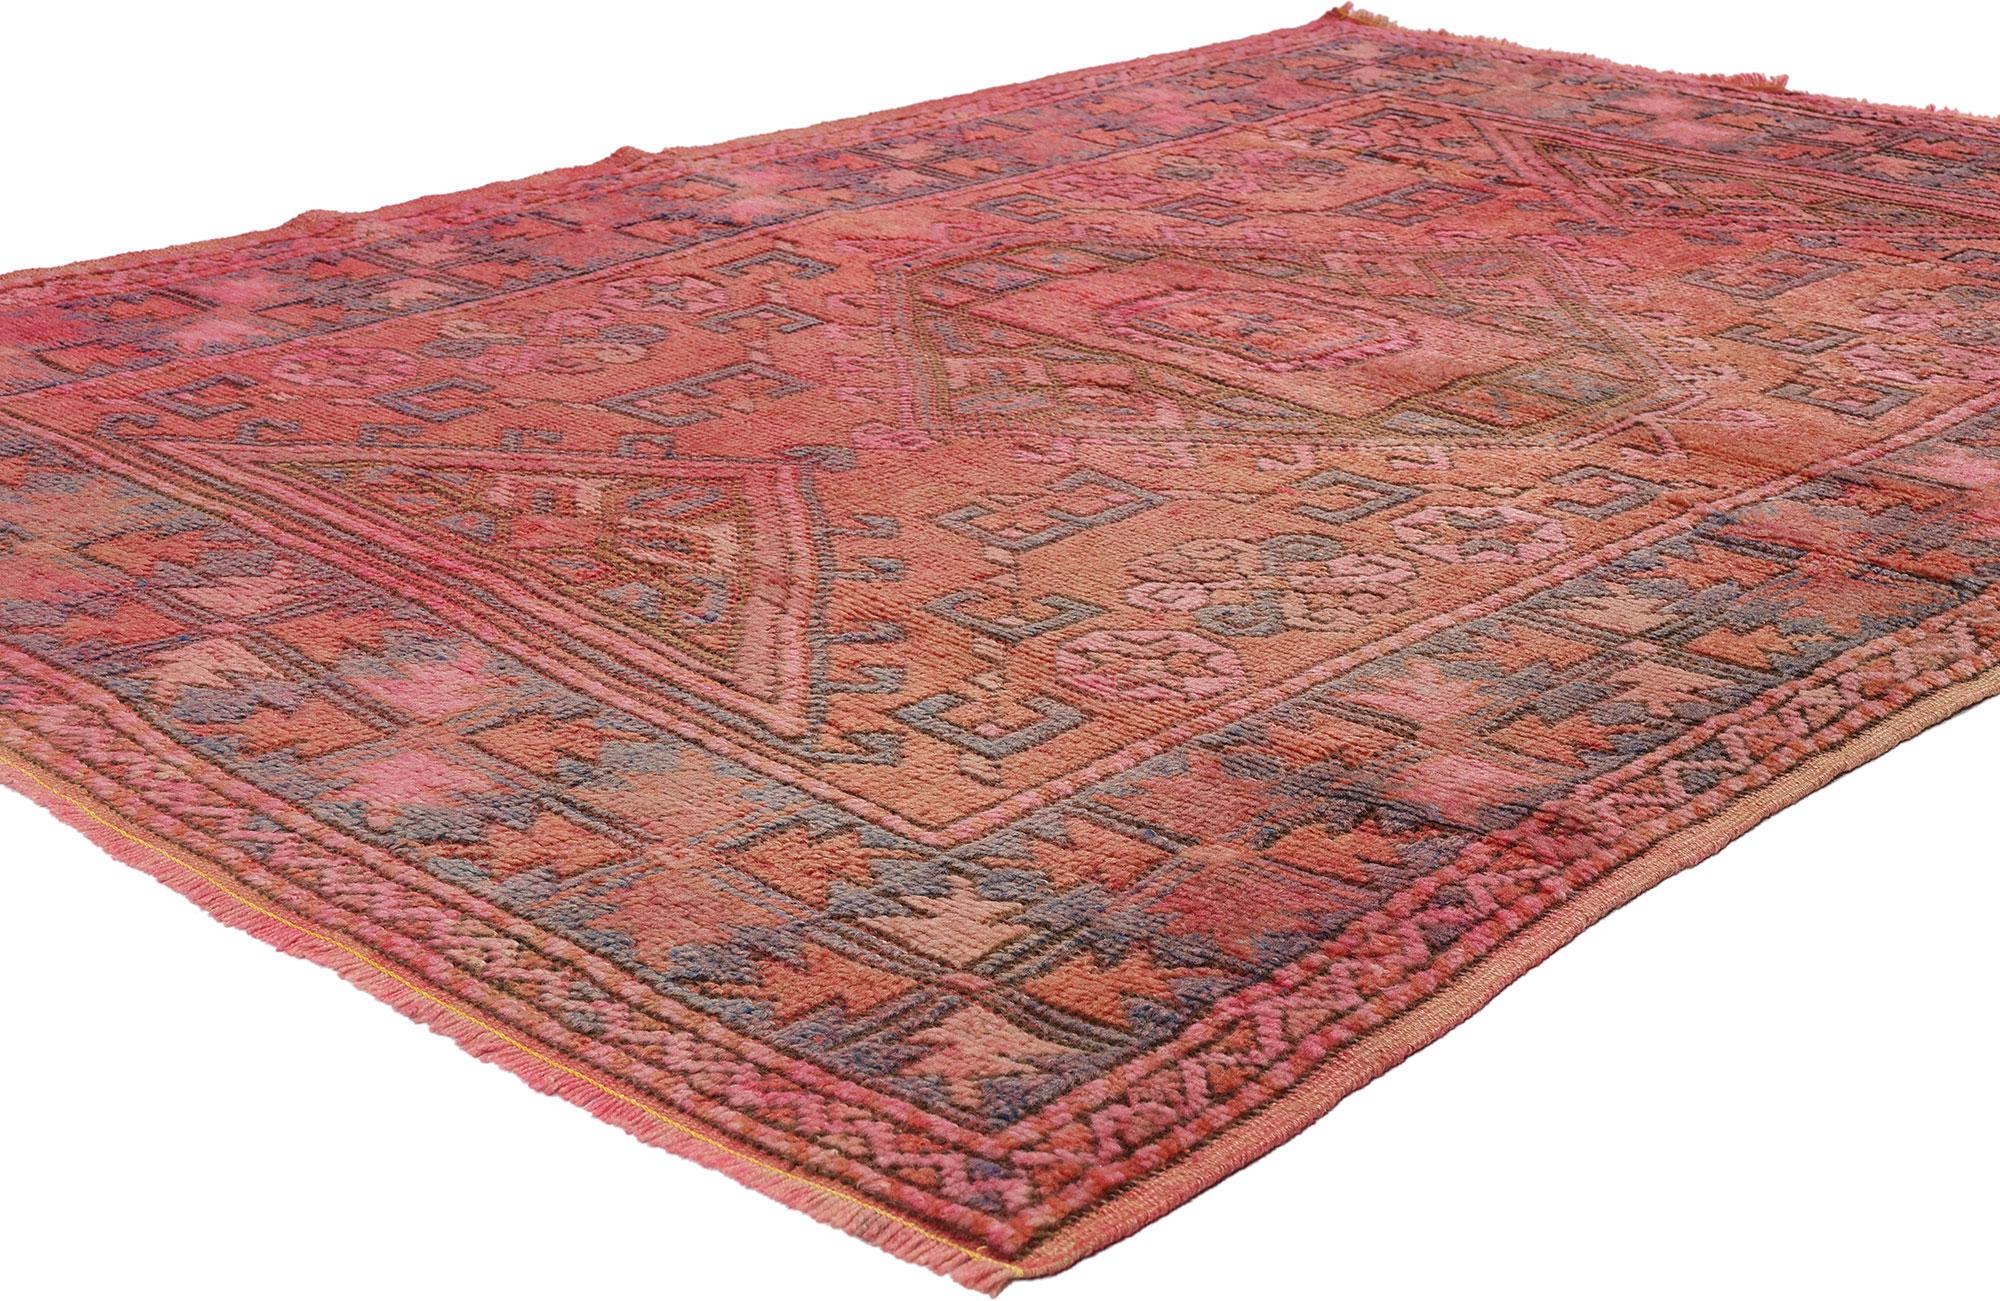 53898 Vintage Pink Turkish Oushak Rug, 04'04 x 06'00. Overdyed Turkish Oushak rugs originate from the Oushak region in western Turkey and undergo a specialized dyeing process to achieve vibrant, modern colors while retaining their traditional